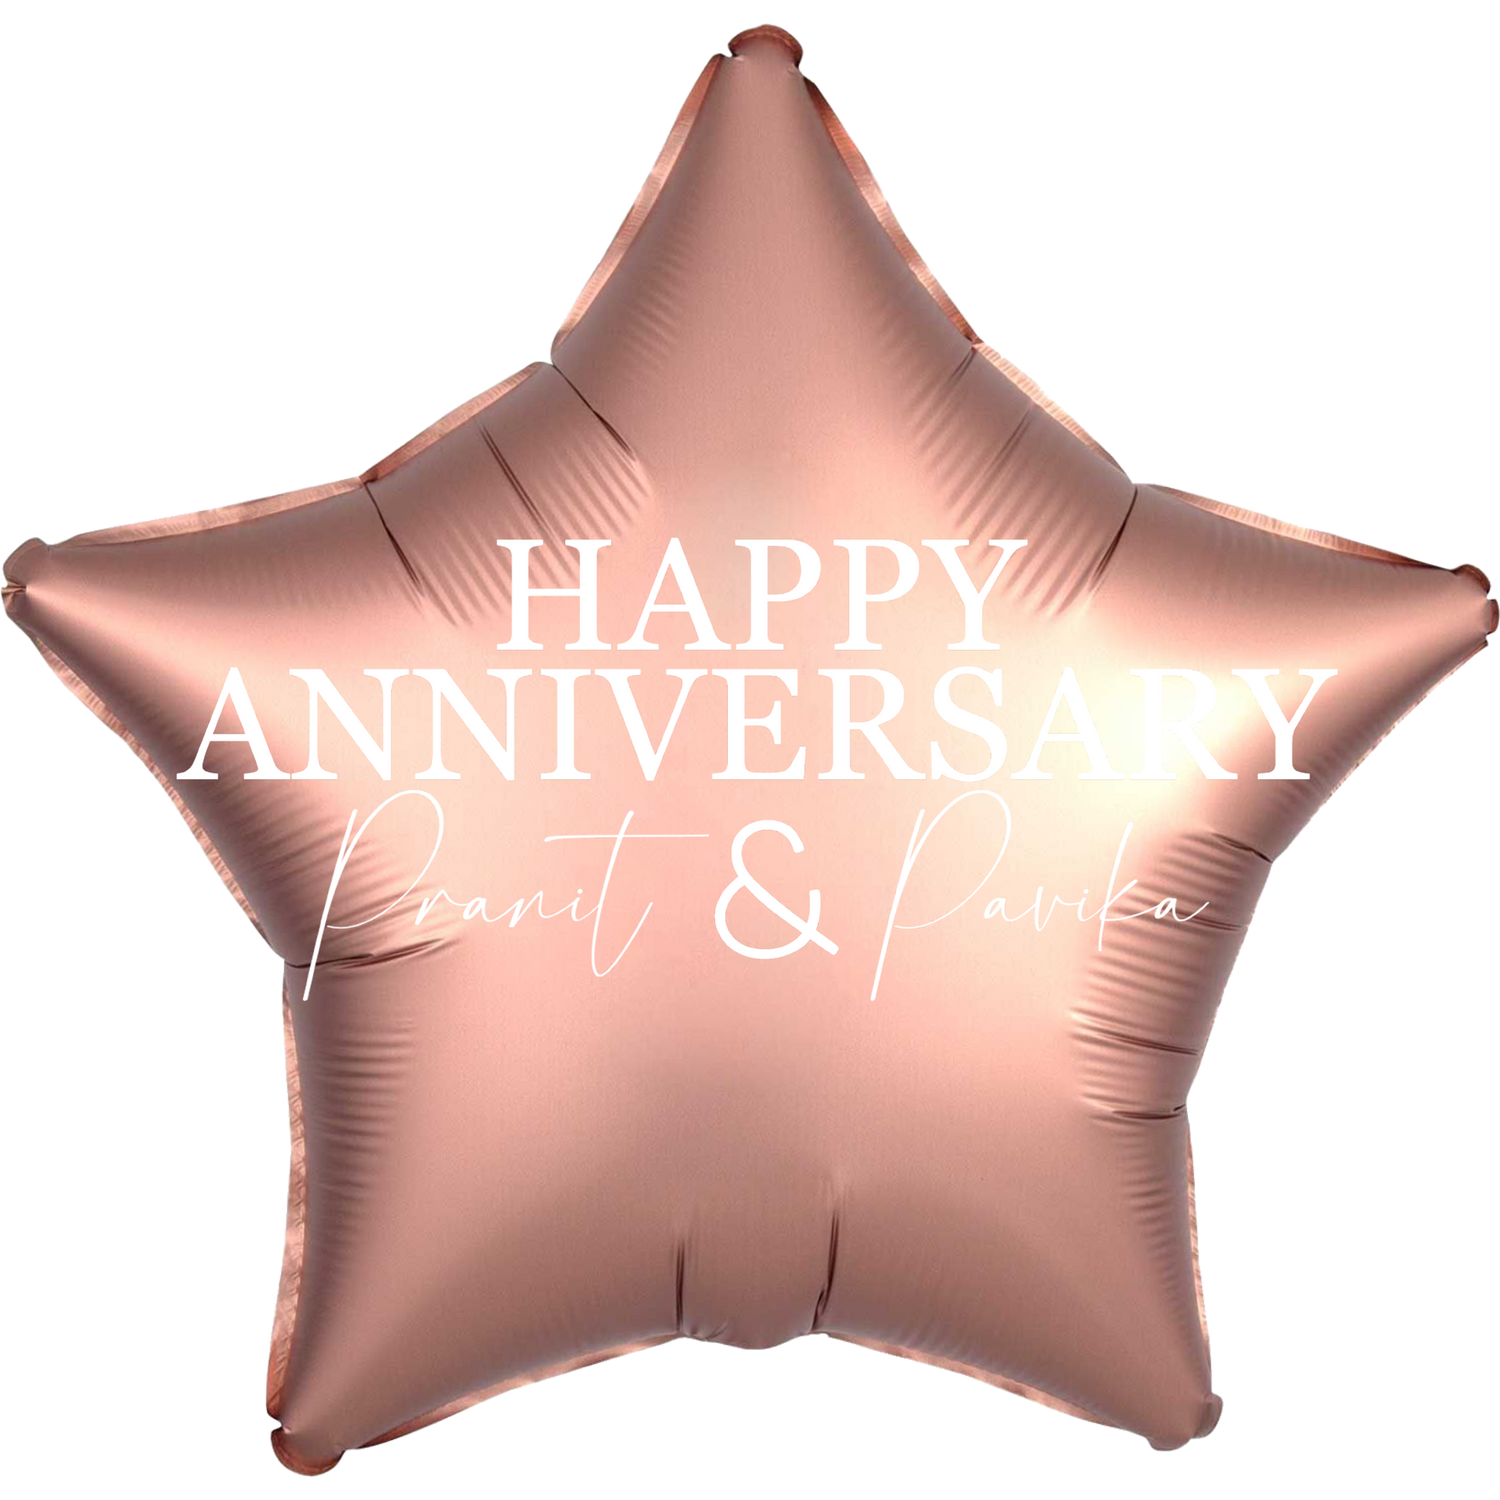 Custom Name/Text/Message Rose Gold Star Balloons For First Wedding Anniversary, 2nd/3rd/5th/10th/15th/20th/25th/30th/35th/40th/45th/50th/55th/60th/65th/75th Marriage Anniversary And Wedding Milestones. Supports Helium/Air, Luxury Bespoke Balloons Make Perfect Decoration Supplies & Surprise For Your Husband/Wife/Partner/Other-Half.